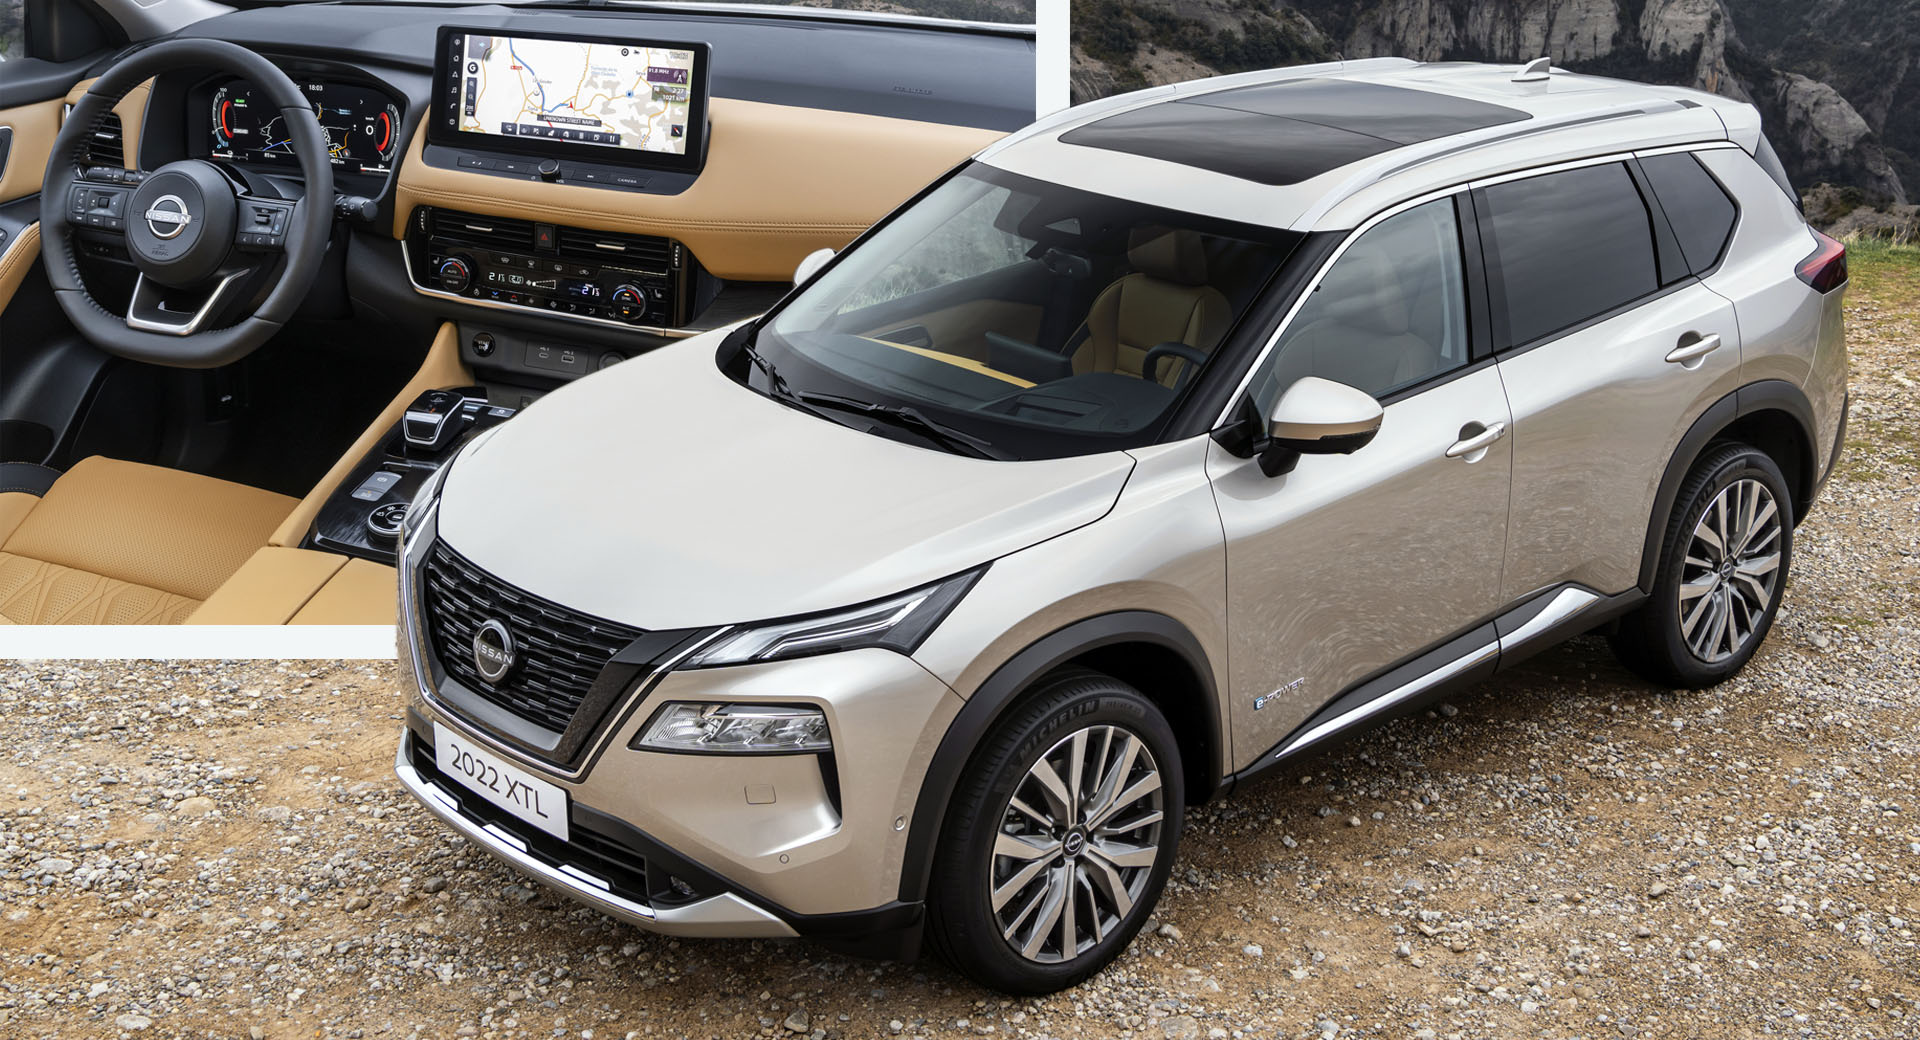 New 2023 Nissan X-Trail Revealed For Europe With Electrified Powertrains